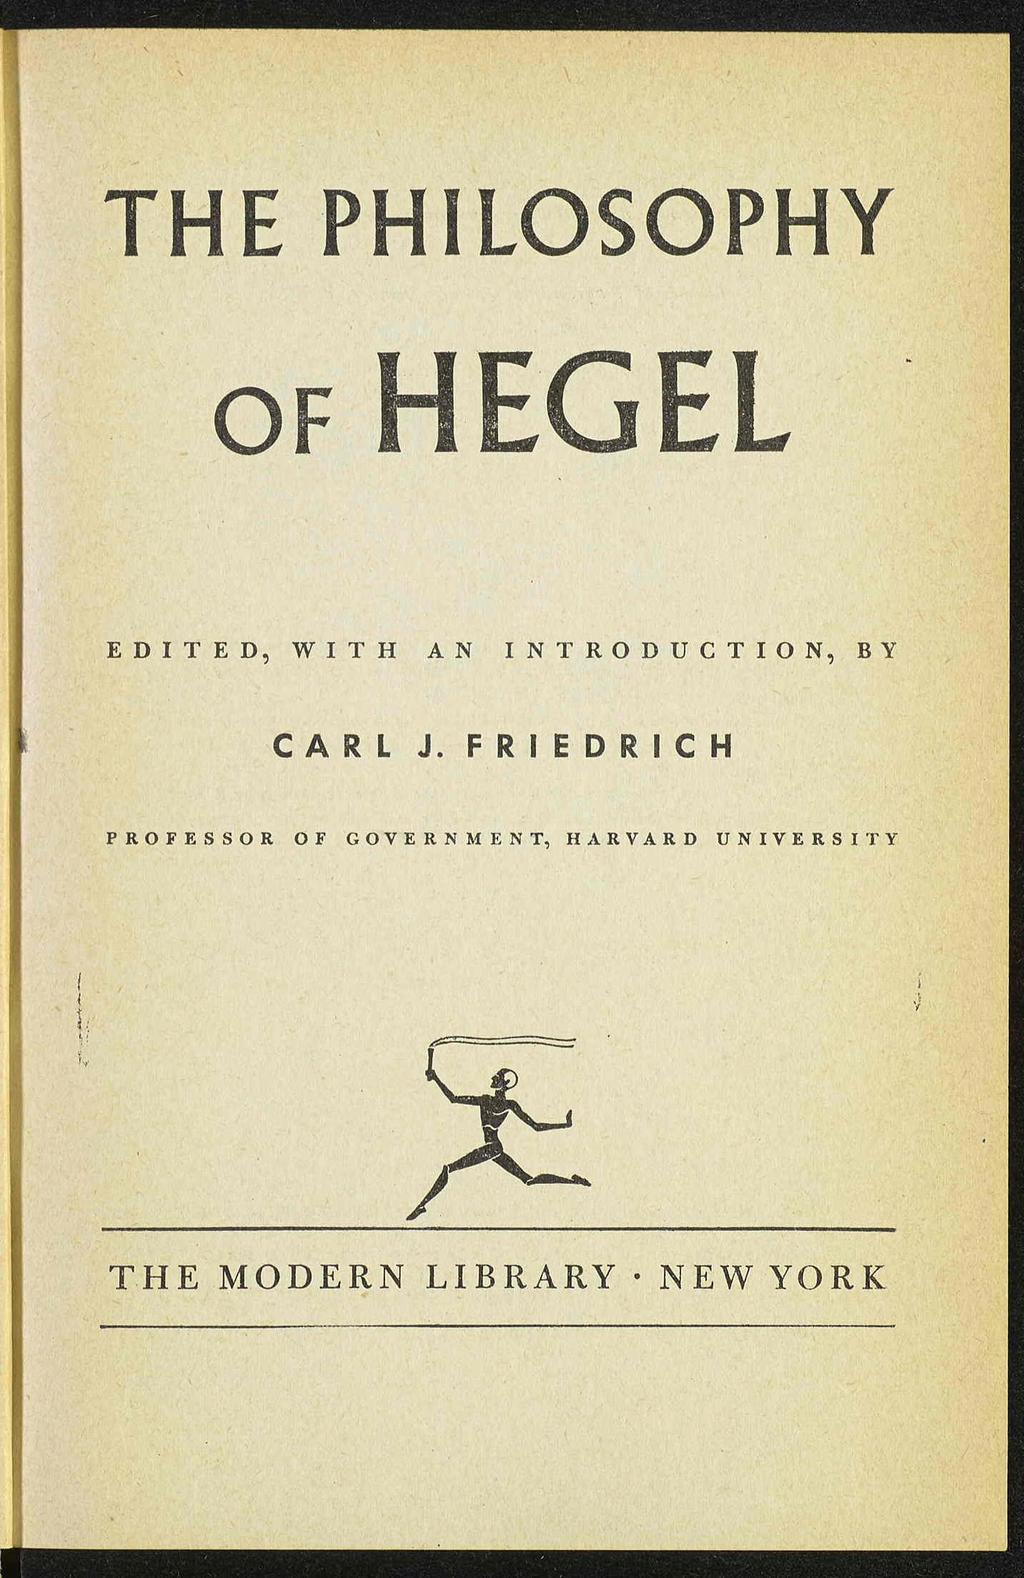 THE PHILOSOPHY of HEGEL EDITED, WITH AN INTRODUCTION, BY CARL J.